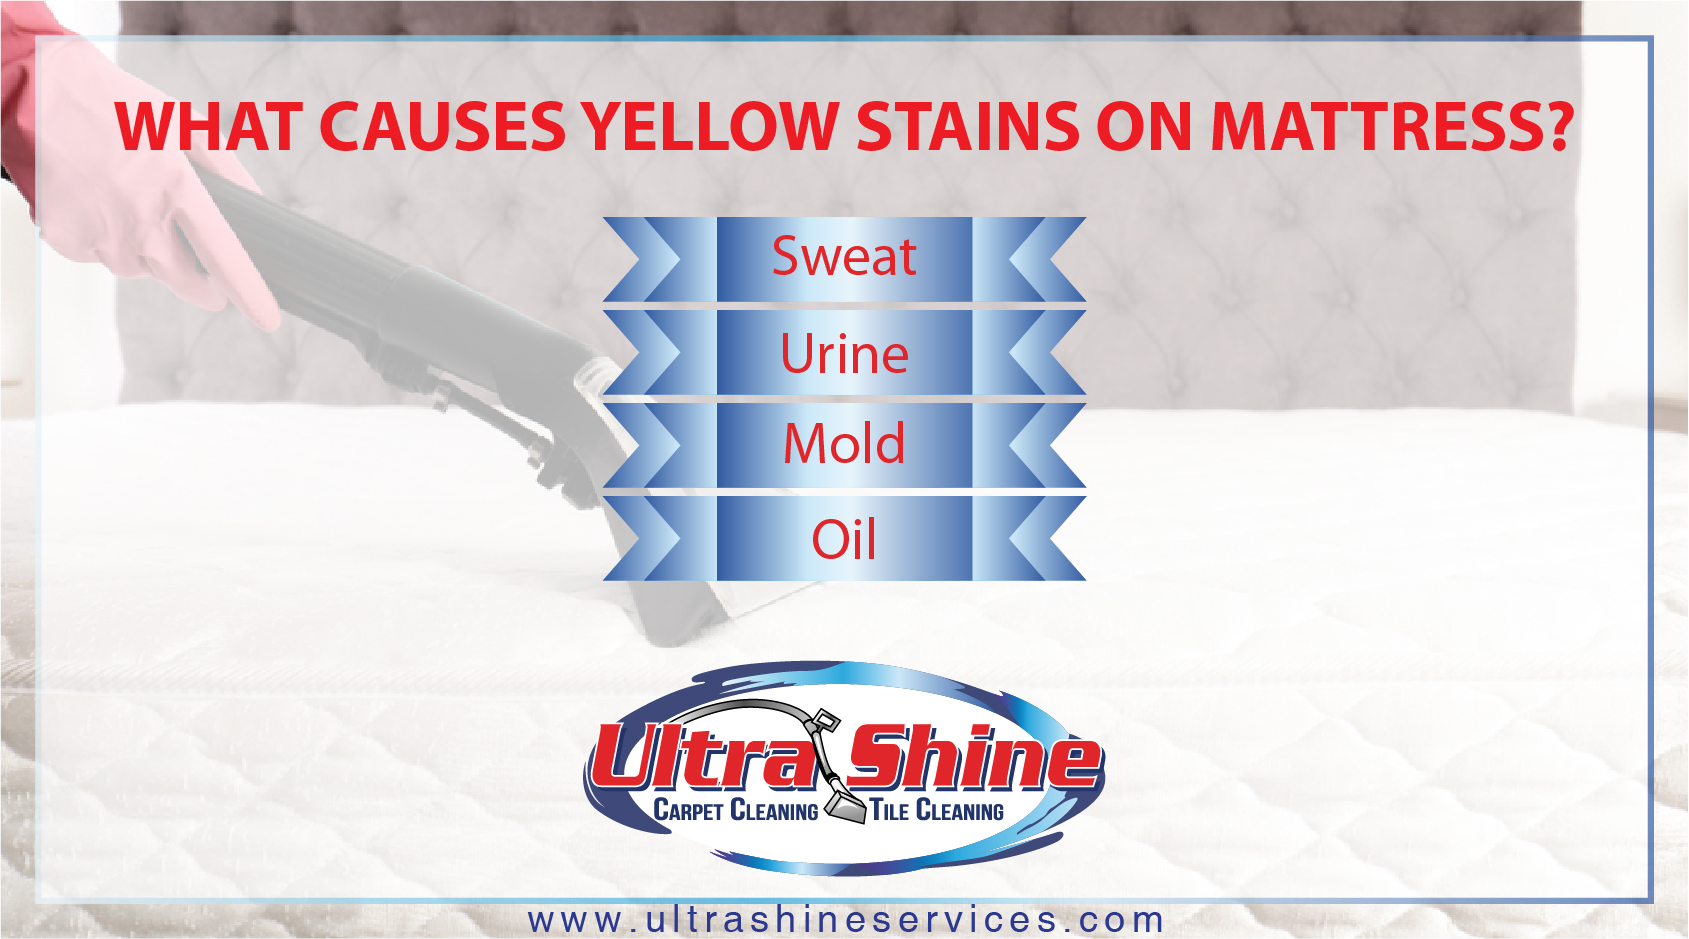 What Causes Yellow Stains On Mattress?